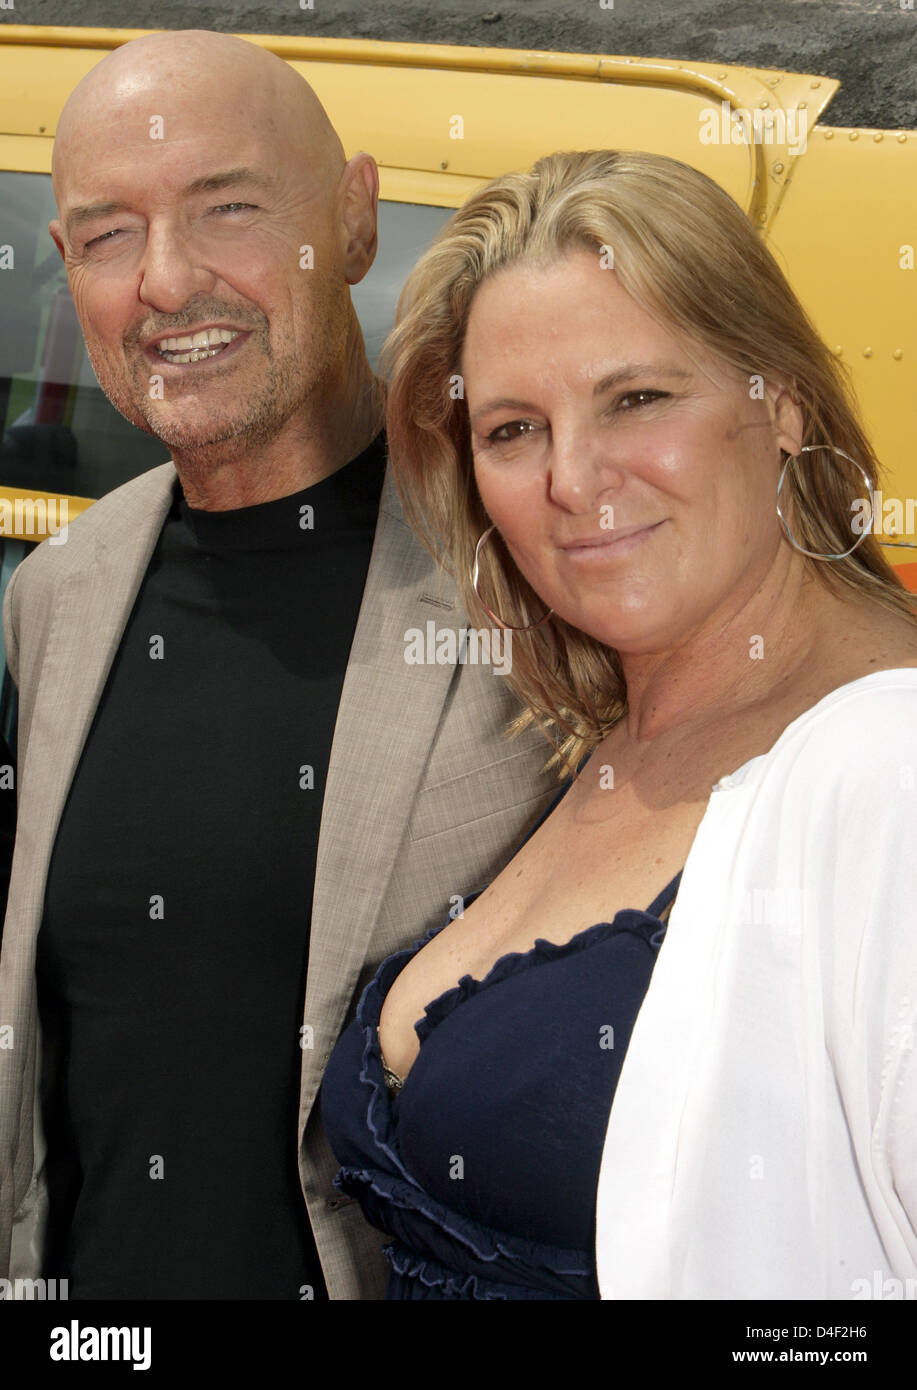 US actor Terry O'Quinn and his wife Lori pose in front of a helicopter in Cologne, Germany, 08 June 2008. O'Quinn is in Germany to promote the fourth season of American mytery series 'Lost'. Photo: JOERG CARSTENSEN Stock Photo